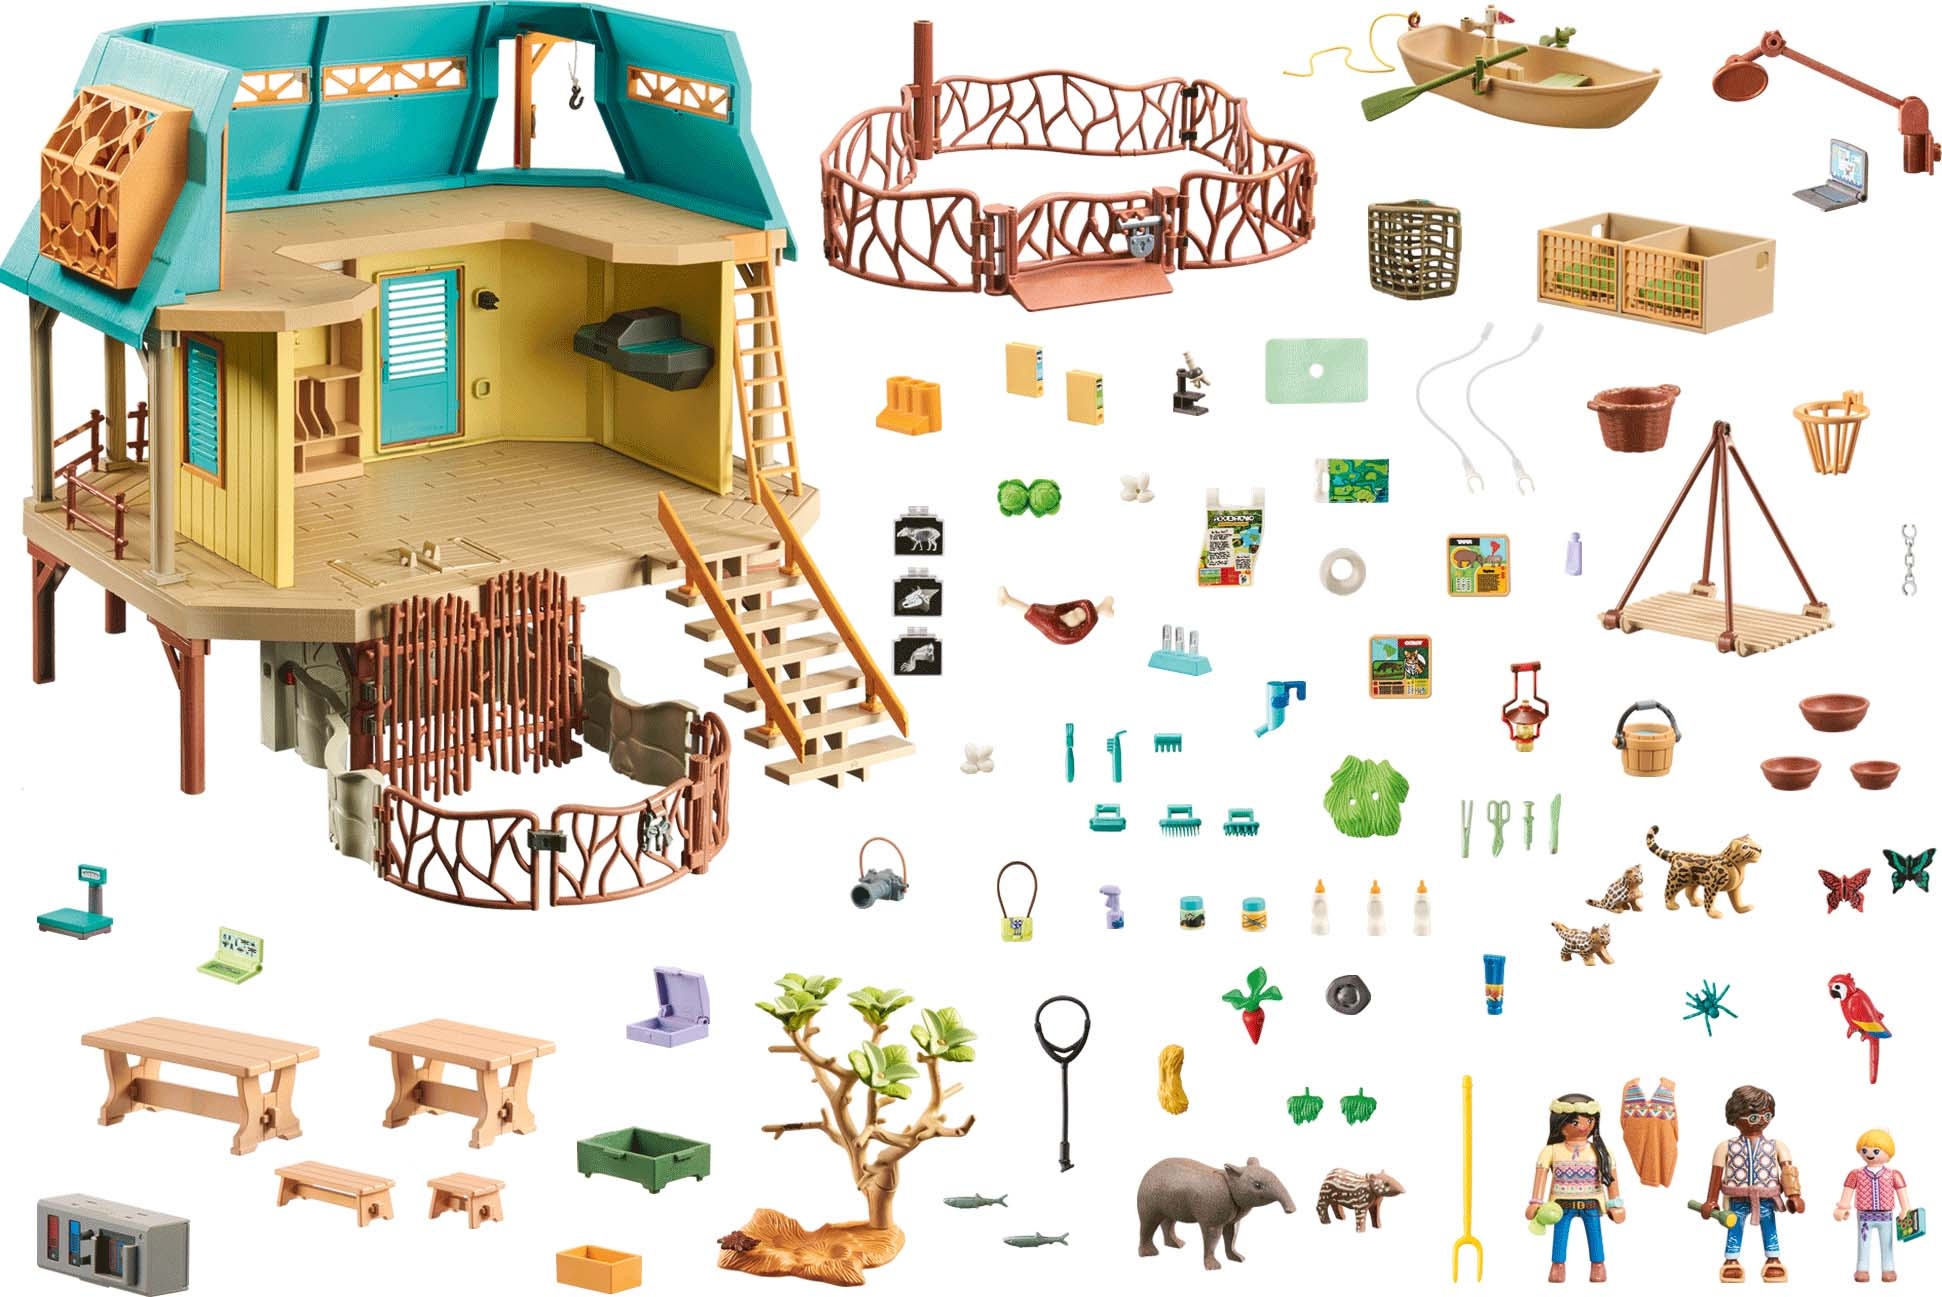 Playmobil® Konstruktions-Spielset »Wiltopia - Tierpflegestation (71007), Wiltopia«, (347 St.), teilweise aus recyceltem Material; Made in Europe